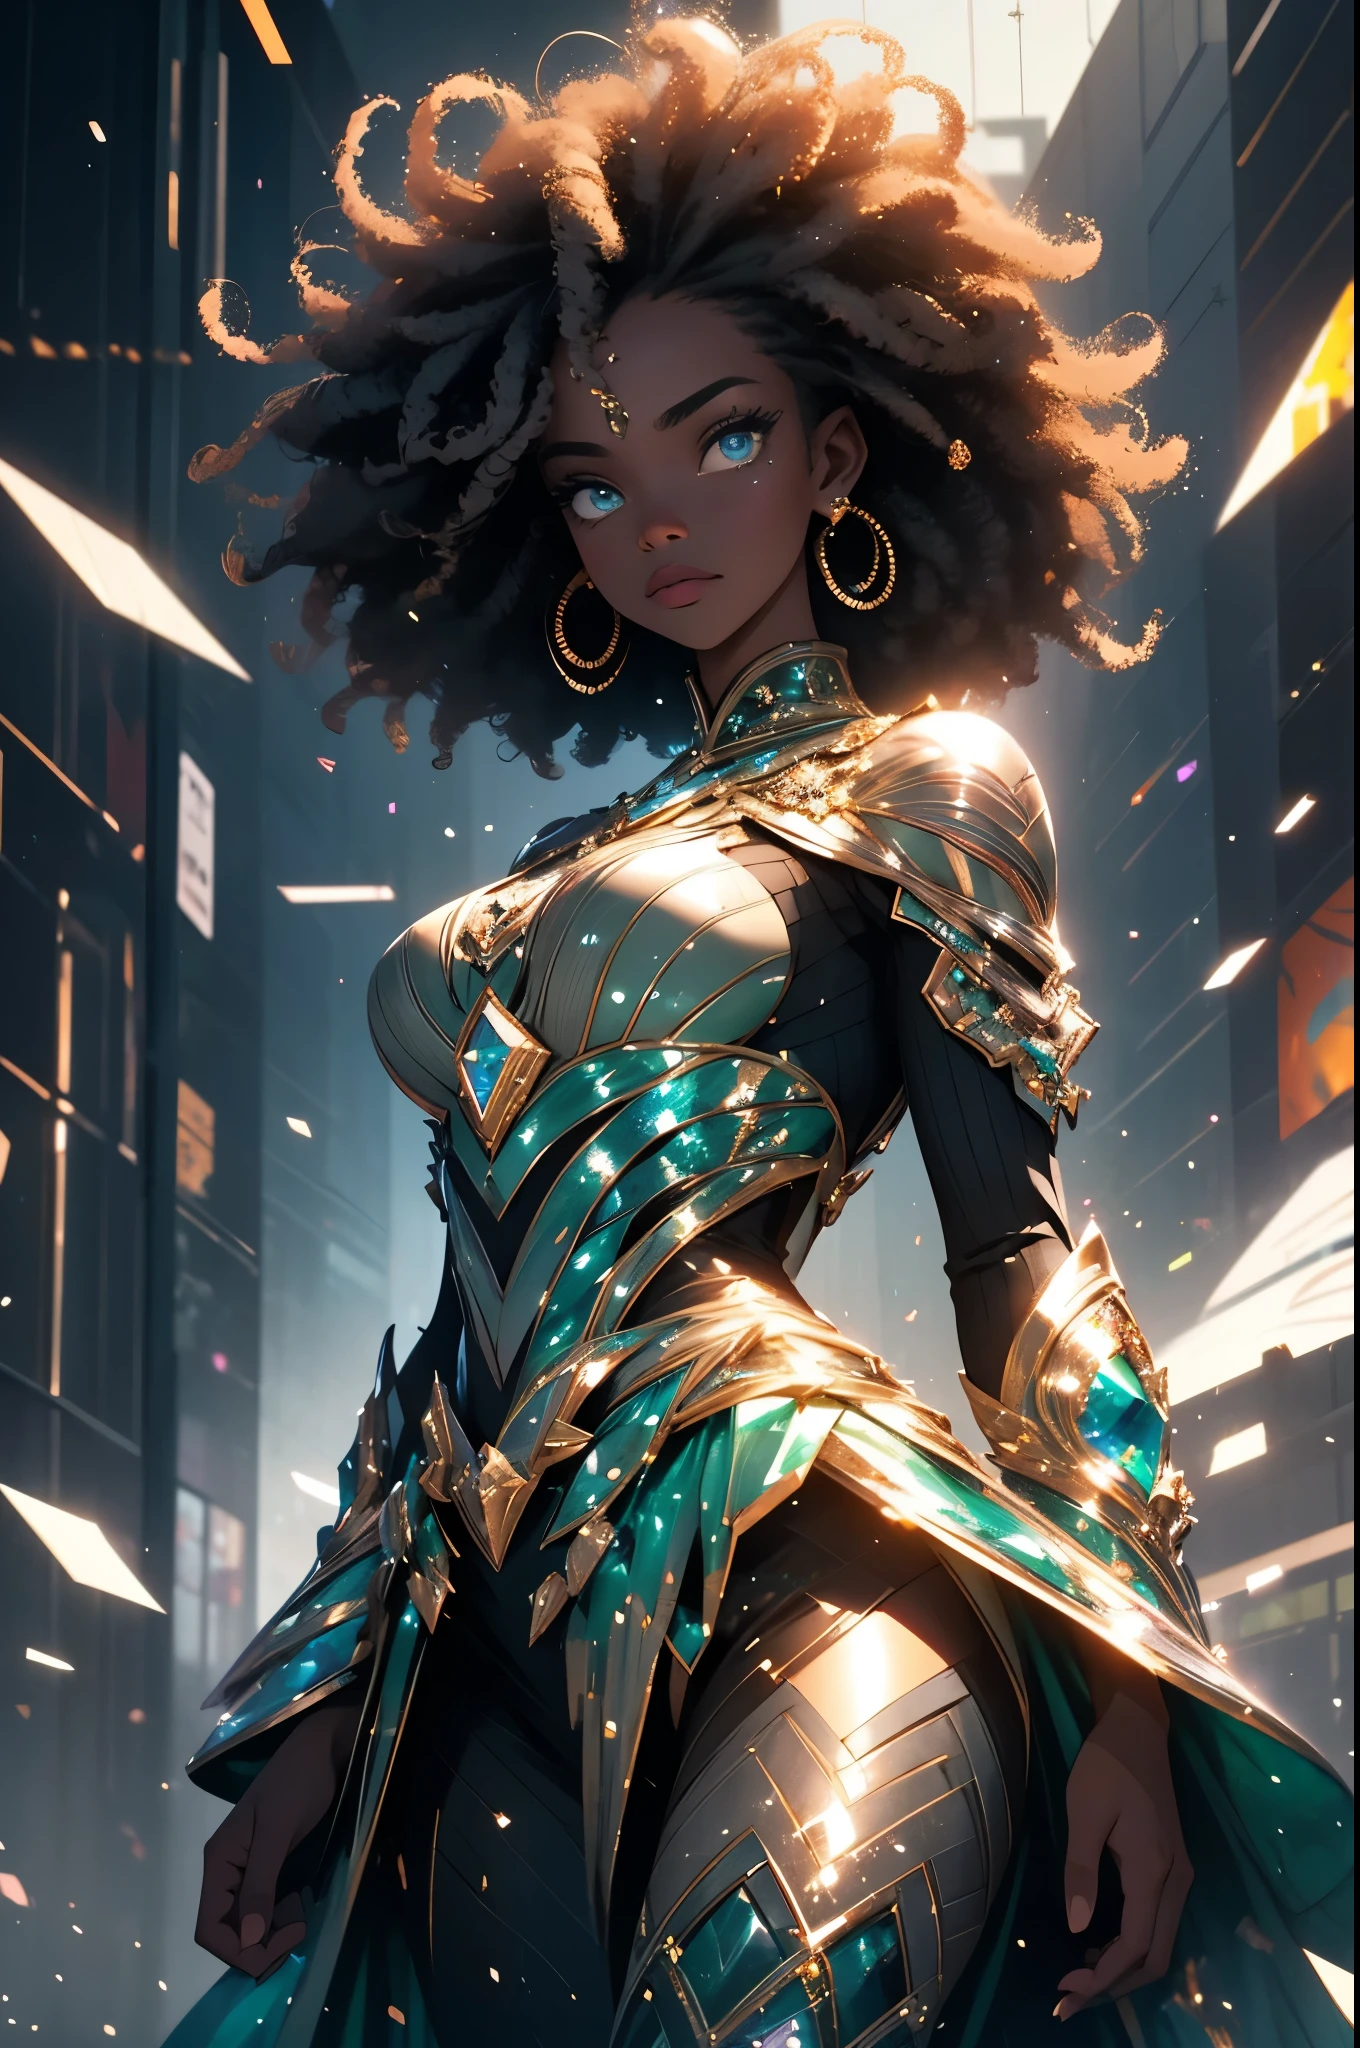 Half body shot of black woman surrounded by glittering bursting mirror glass particles, dressed in african designed attire, her image partially blurry, blue eyes and curly hair, standing in a city with abstract building infrastructures,  glittering and shimmering light reflecting on the mirror glass particles providing a beautiful and atmospheric scenery, beautiful and moody images, green, grey and silver colour grading.